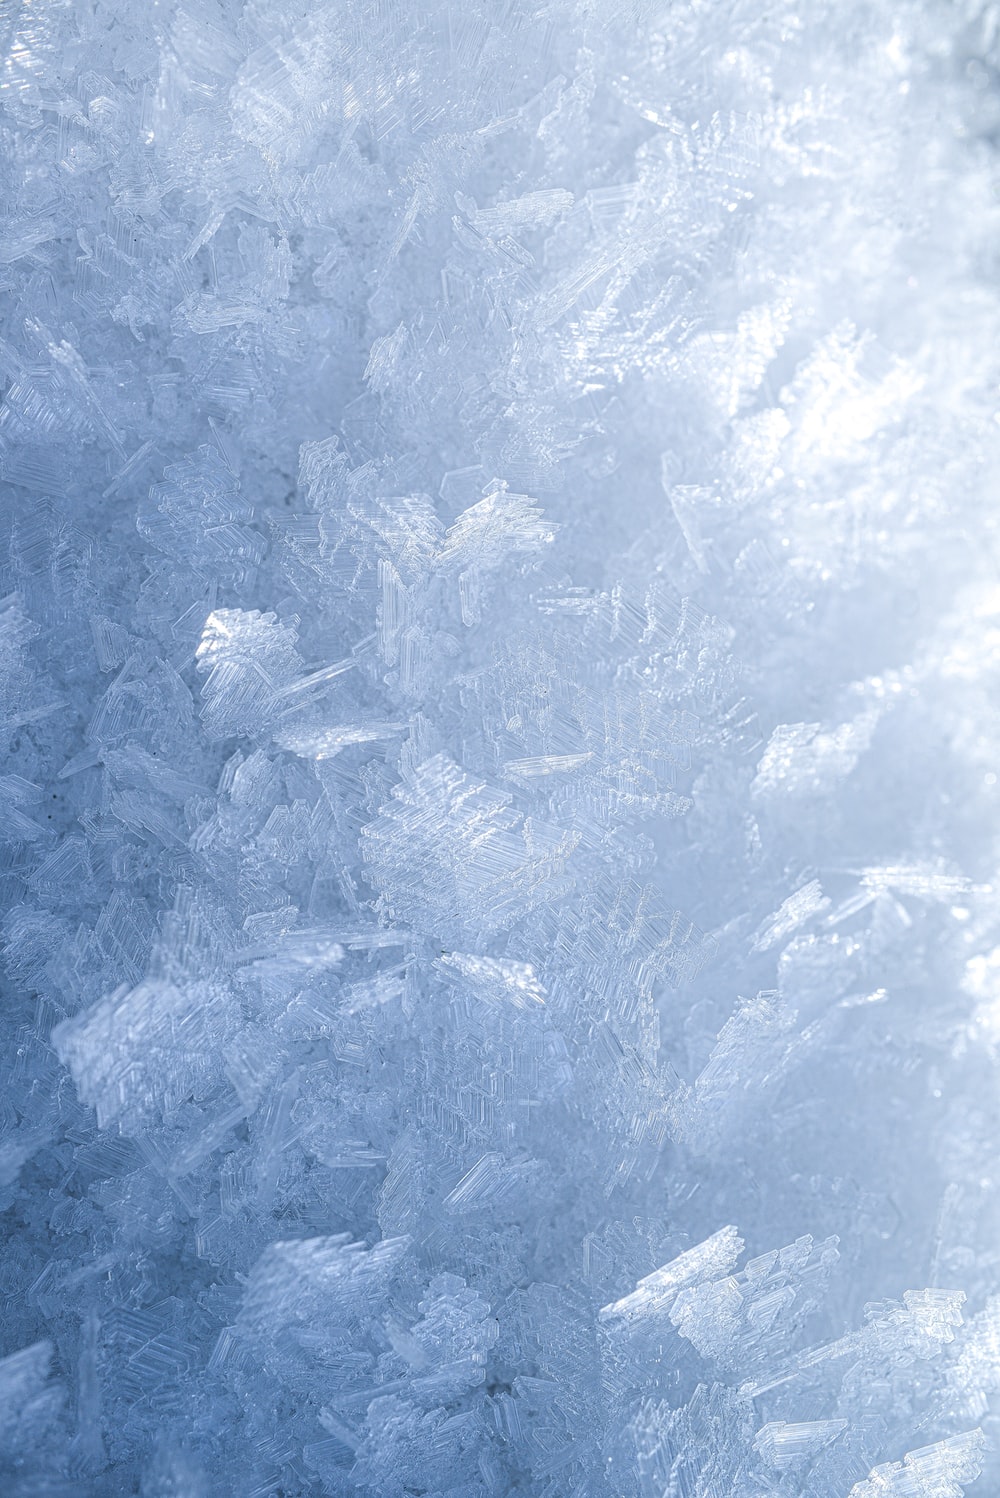 Ice Crystal Picture. Download Free Image